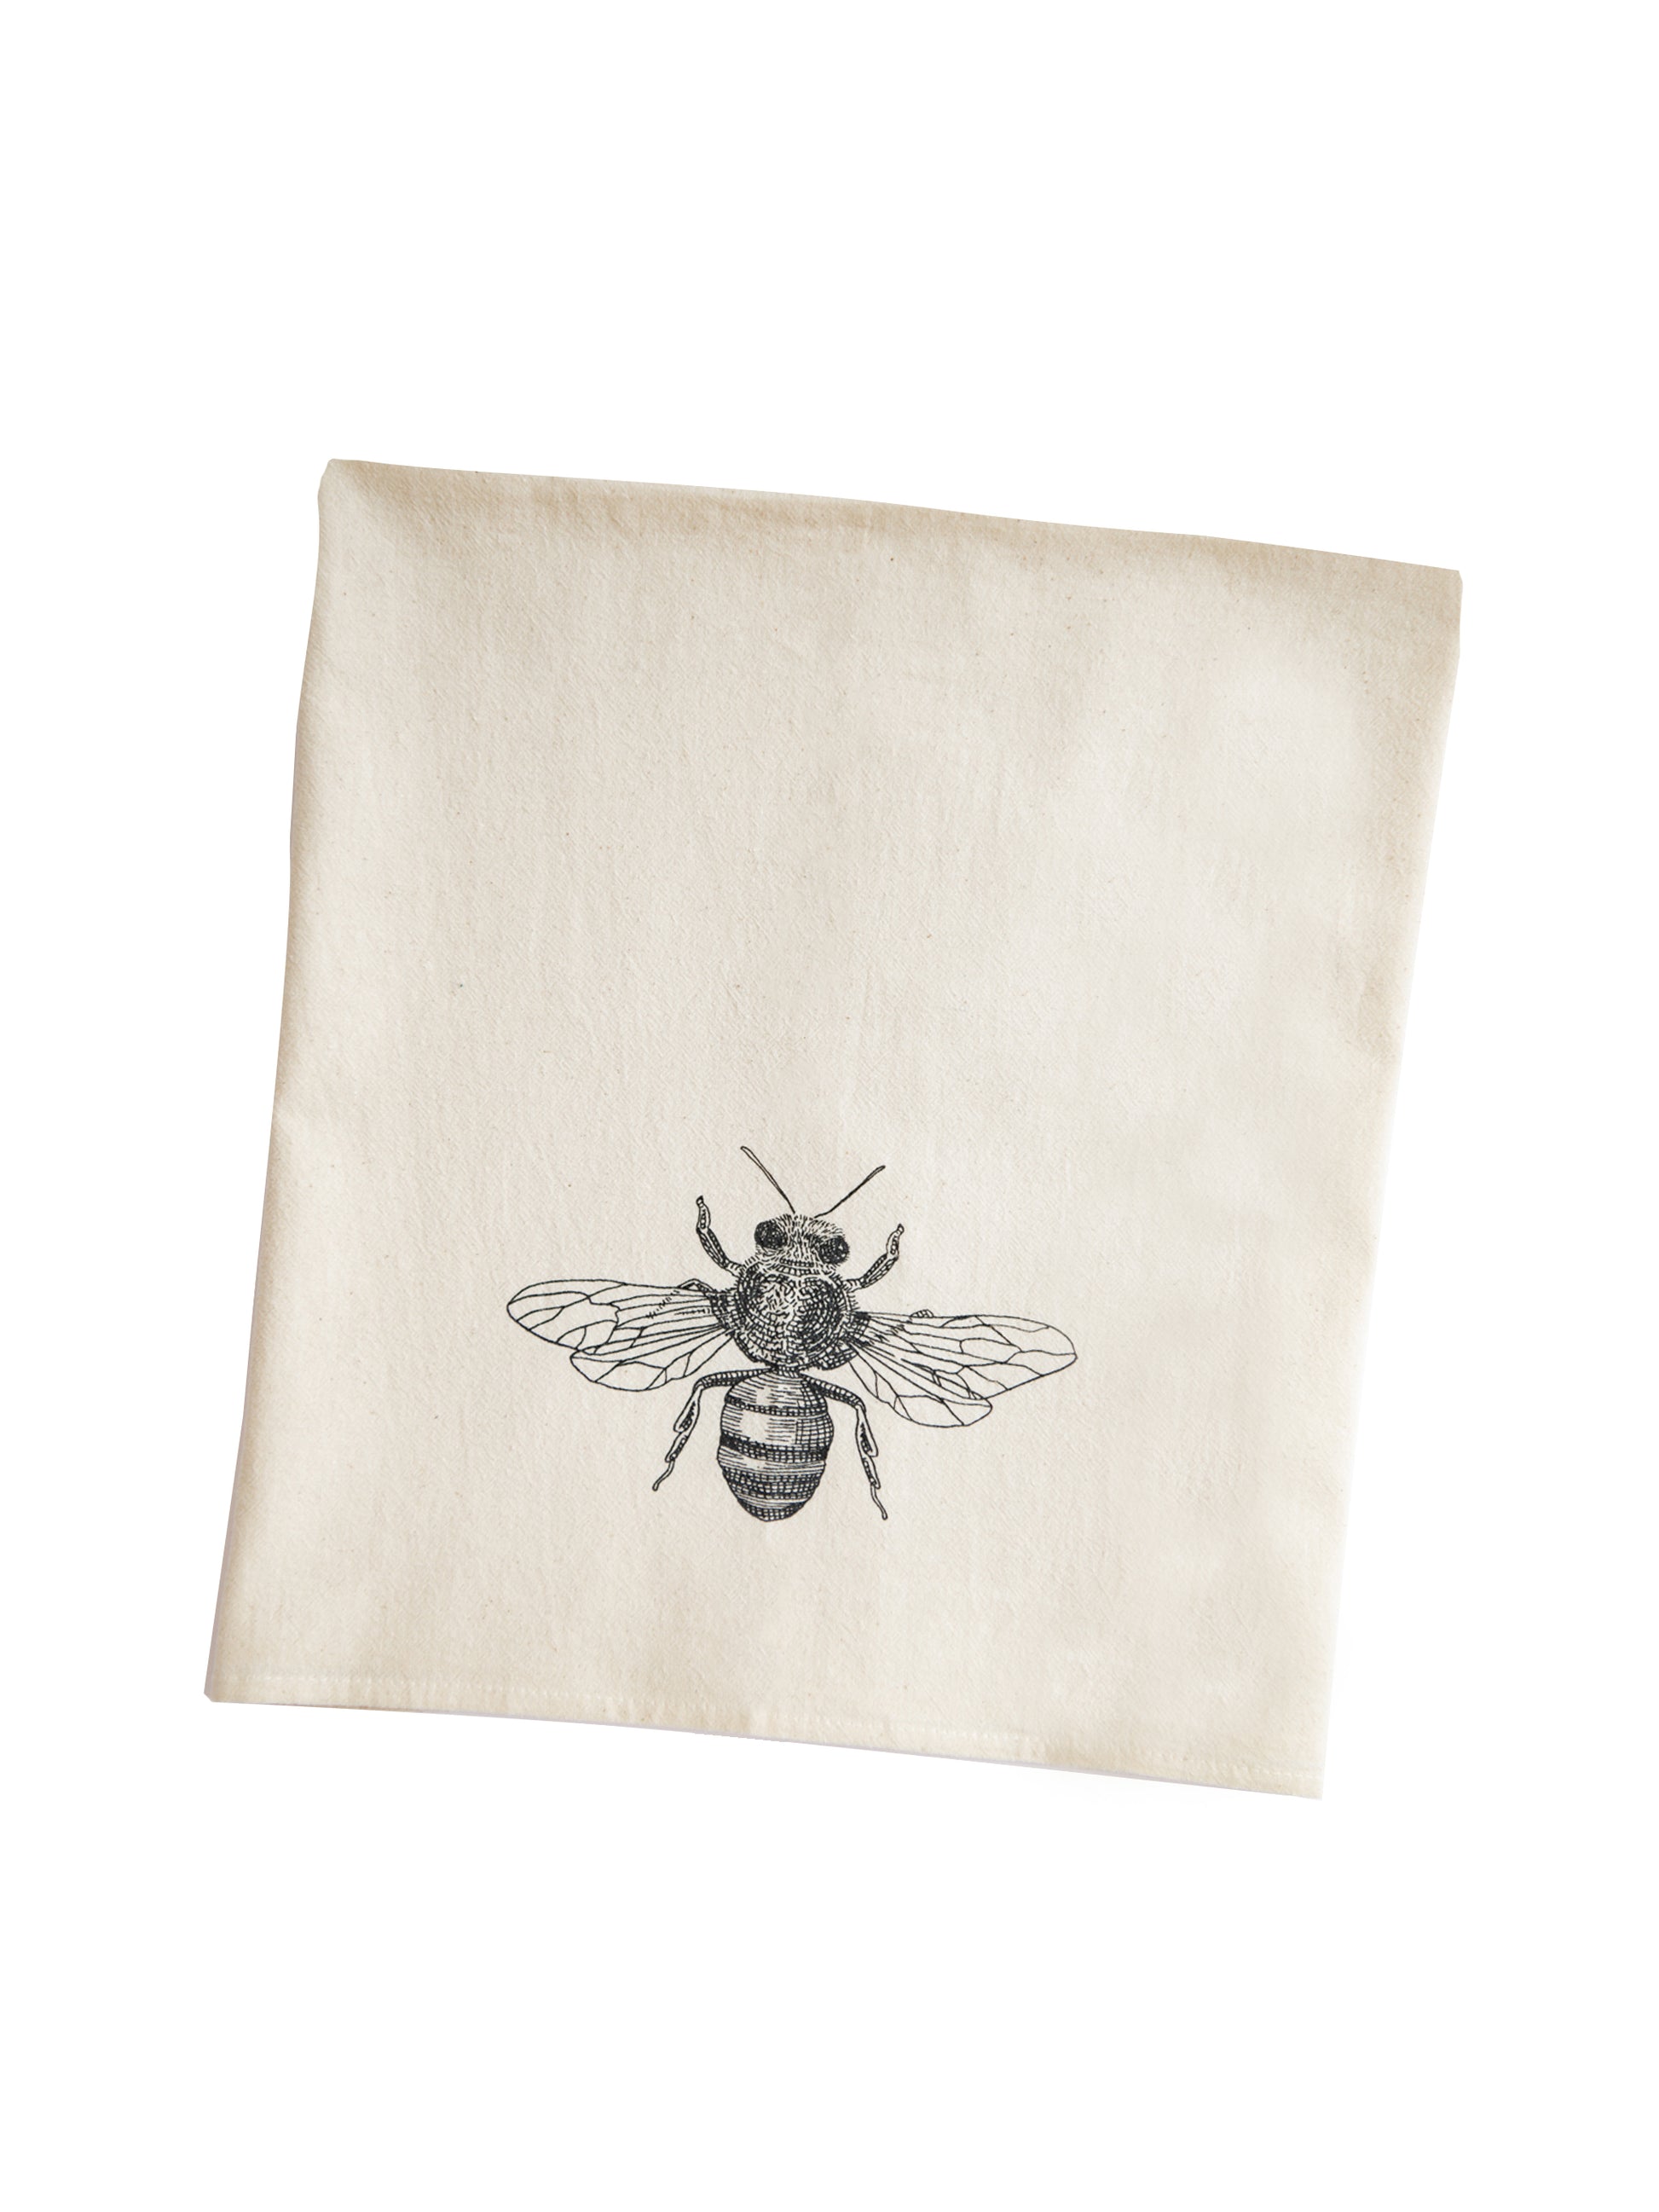 Shop the Bee Flour Sack Towel at Weston Table